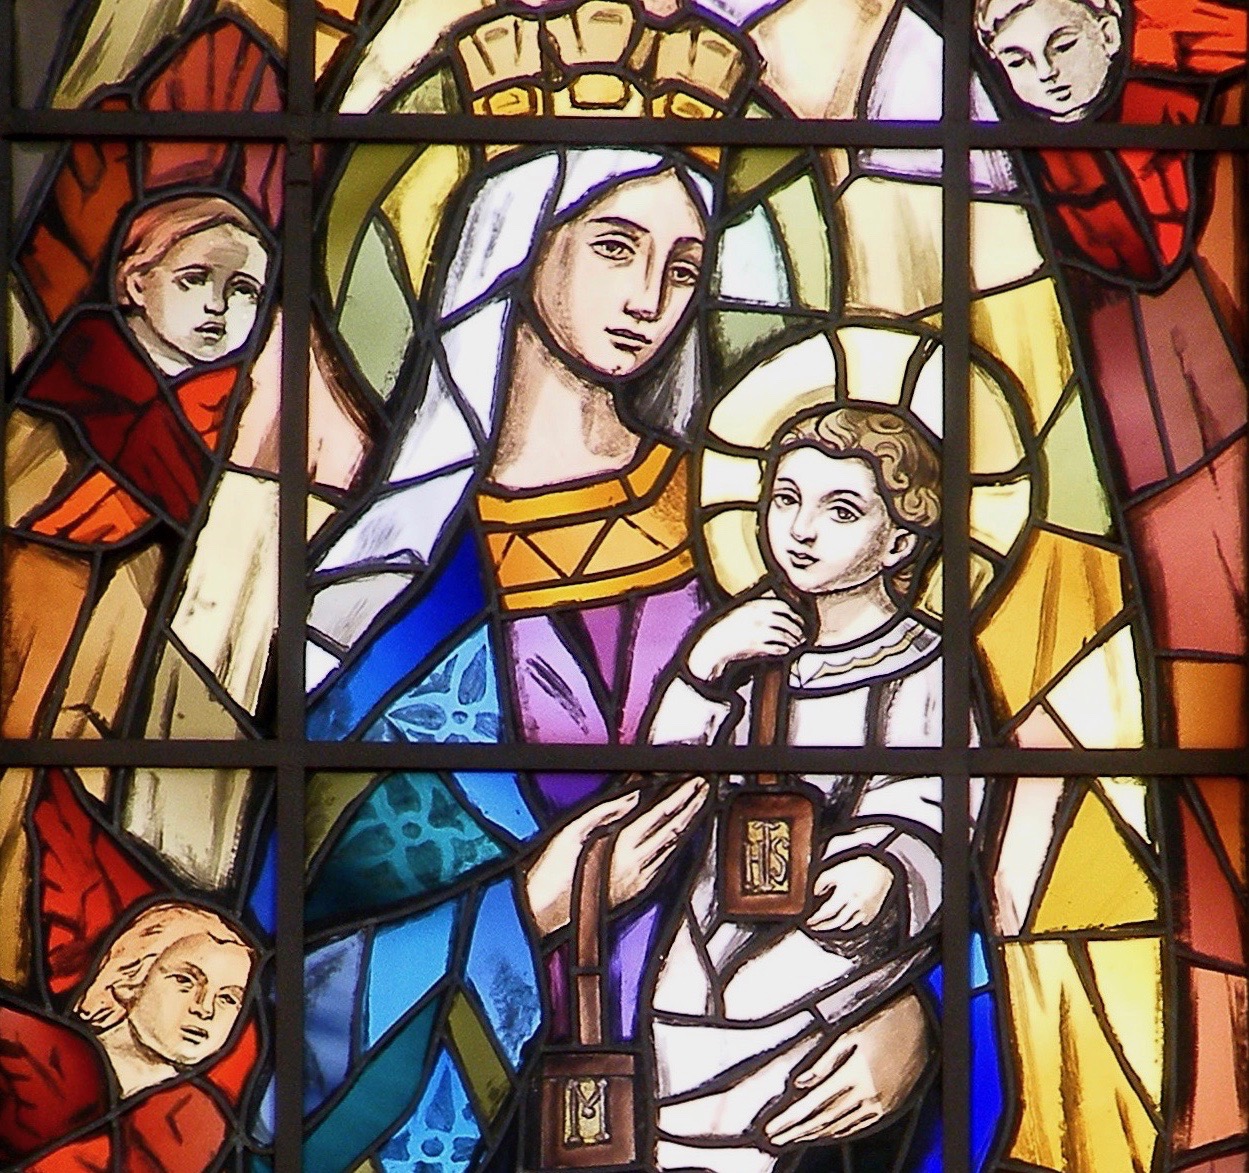 Stained-Glass-of-Our-Lady-of-Mount-Carmel-and-Child-Jesus-of-Balluta-Photo-taken-by-Mark-Micallef-Perconte.jpg